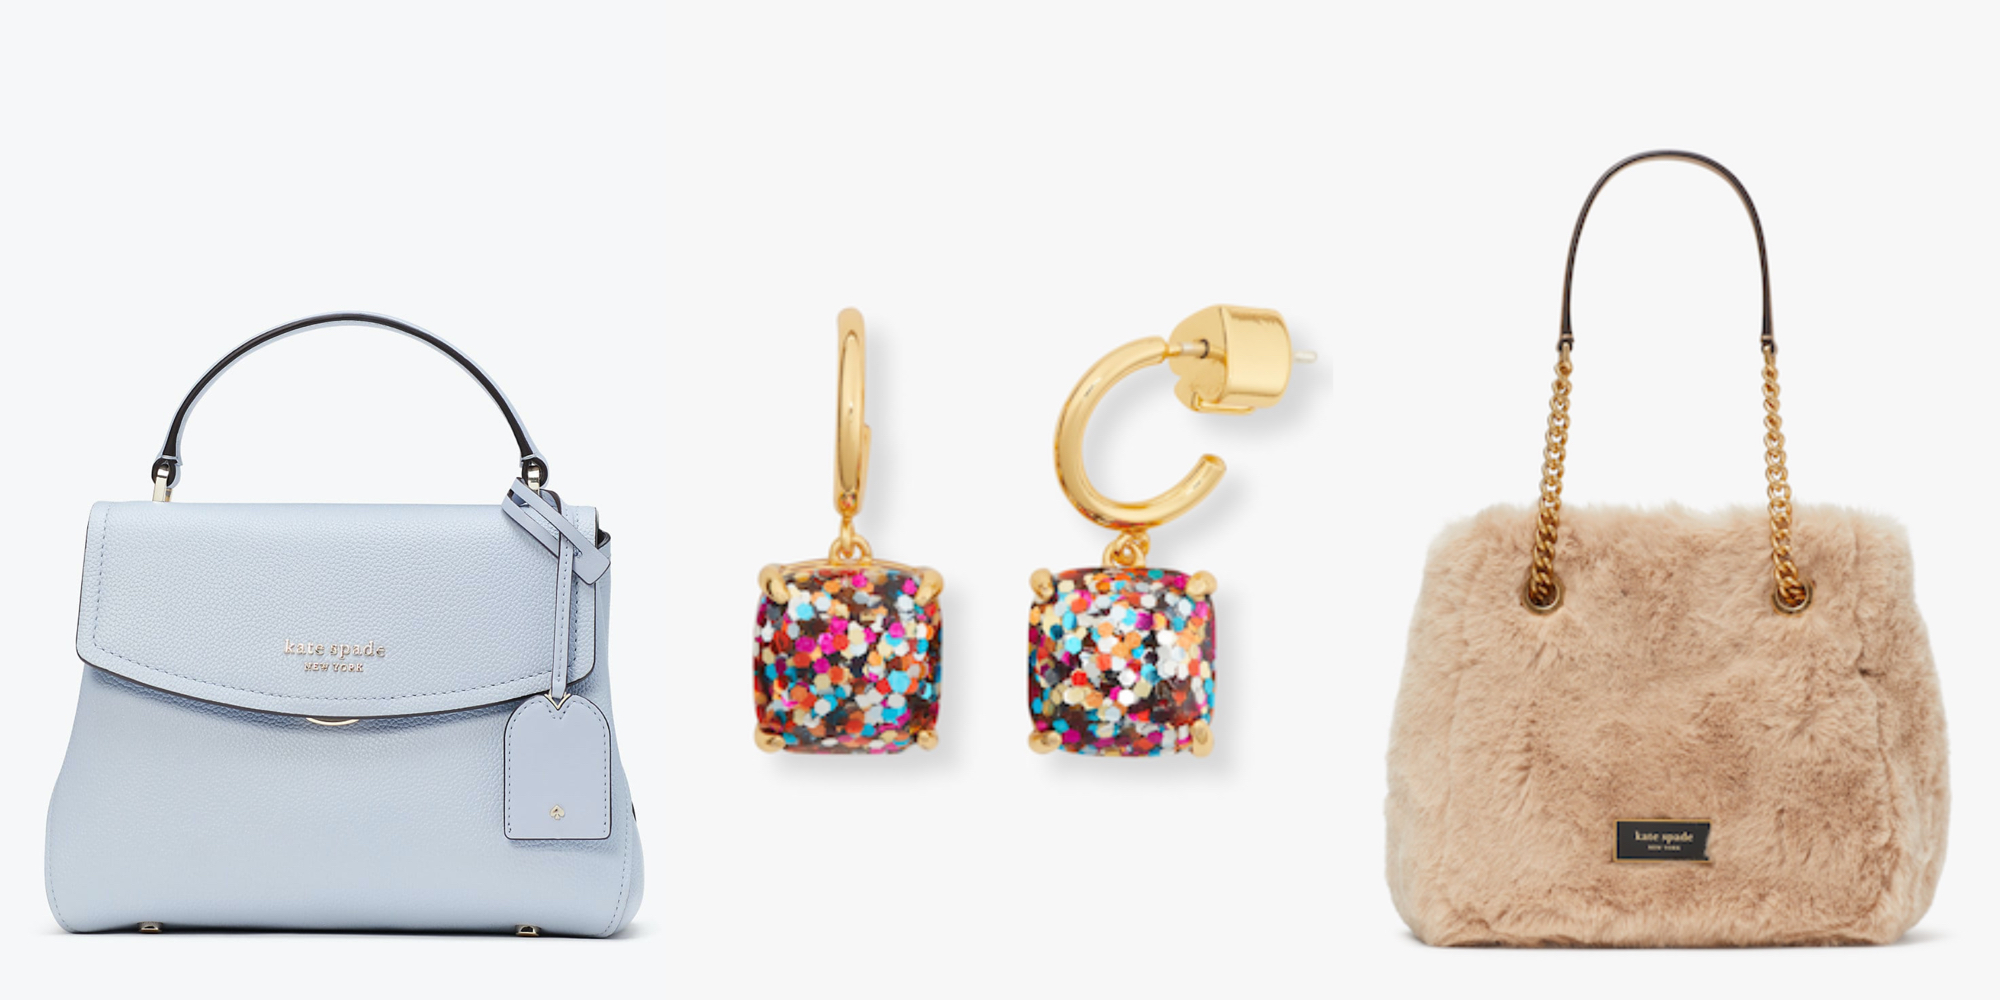 Kate Spade Cyber Monday Sale: Save Up to 50% on Best-Selling Handbags